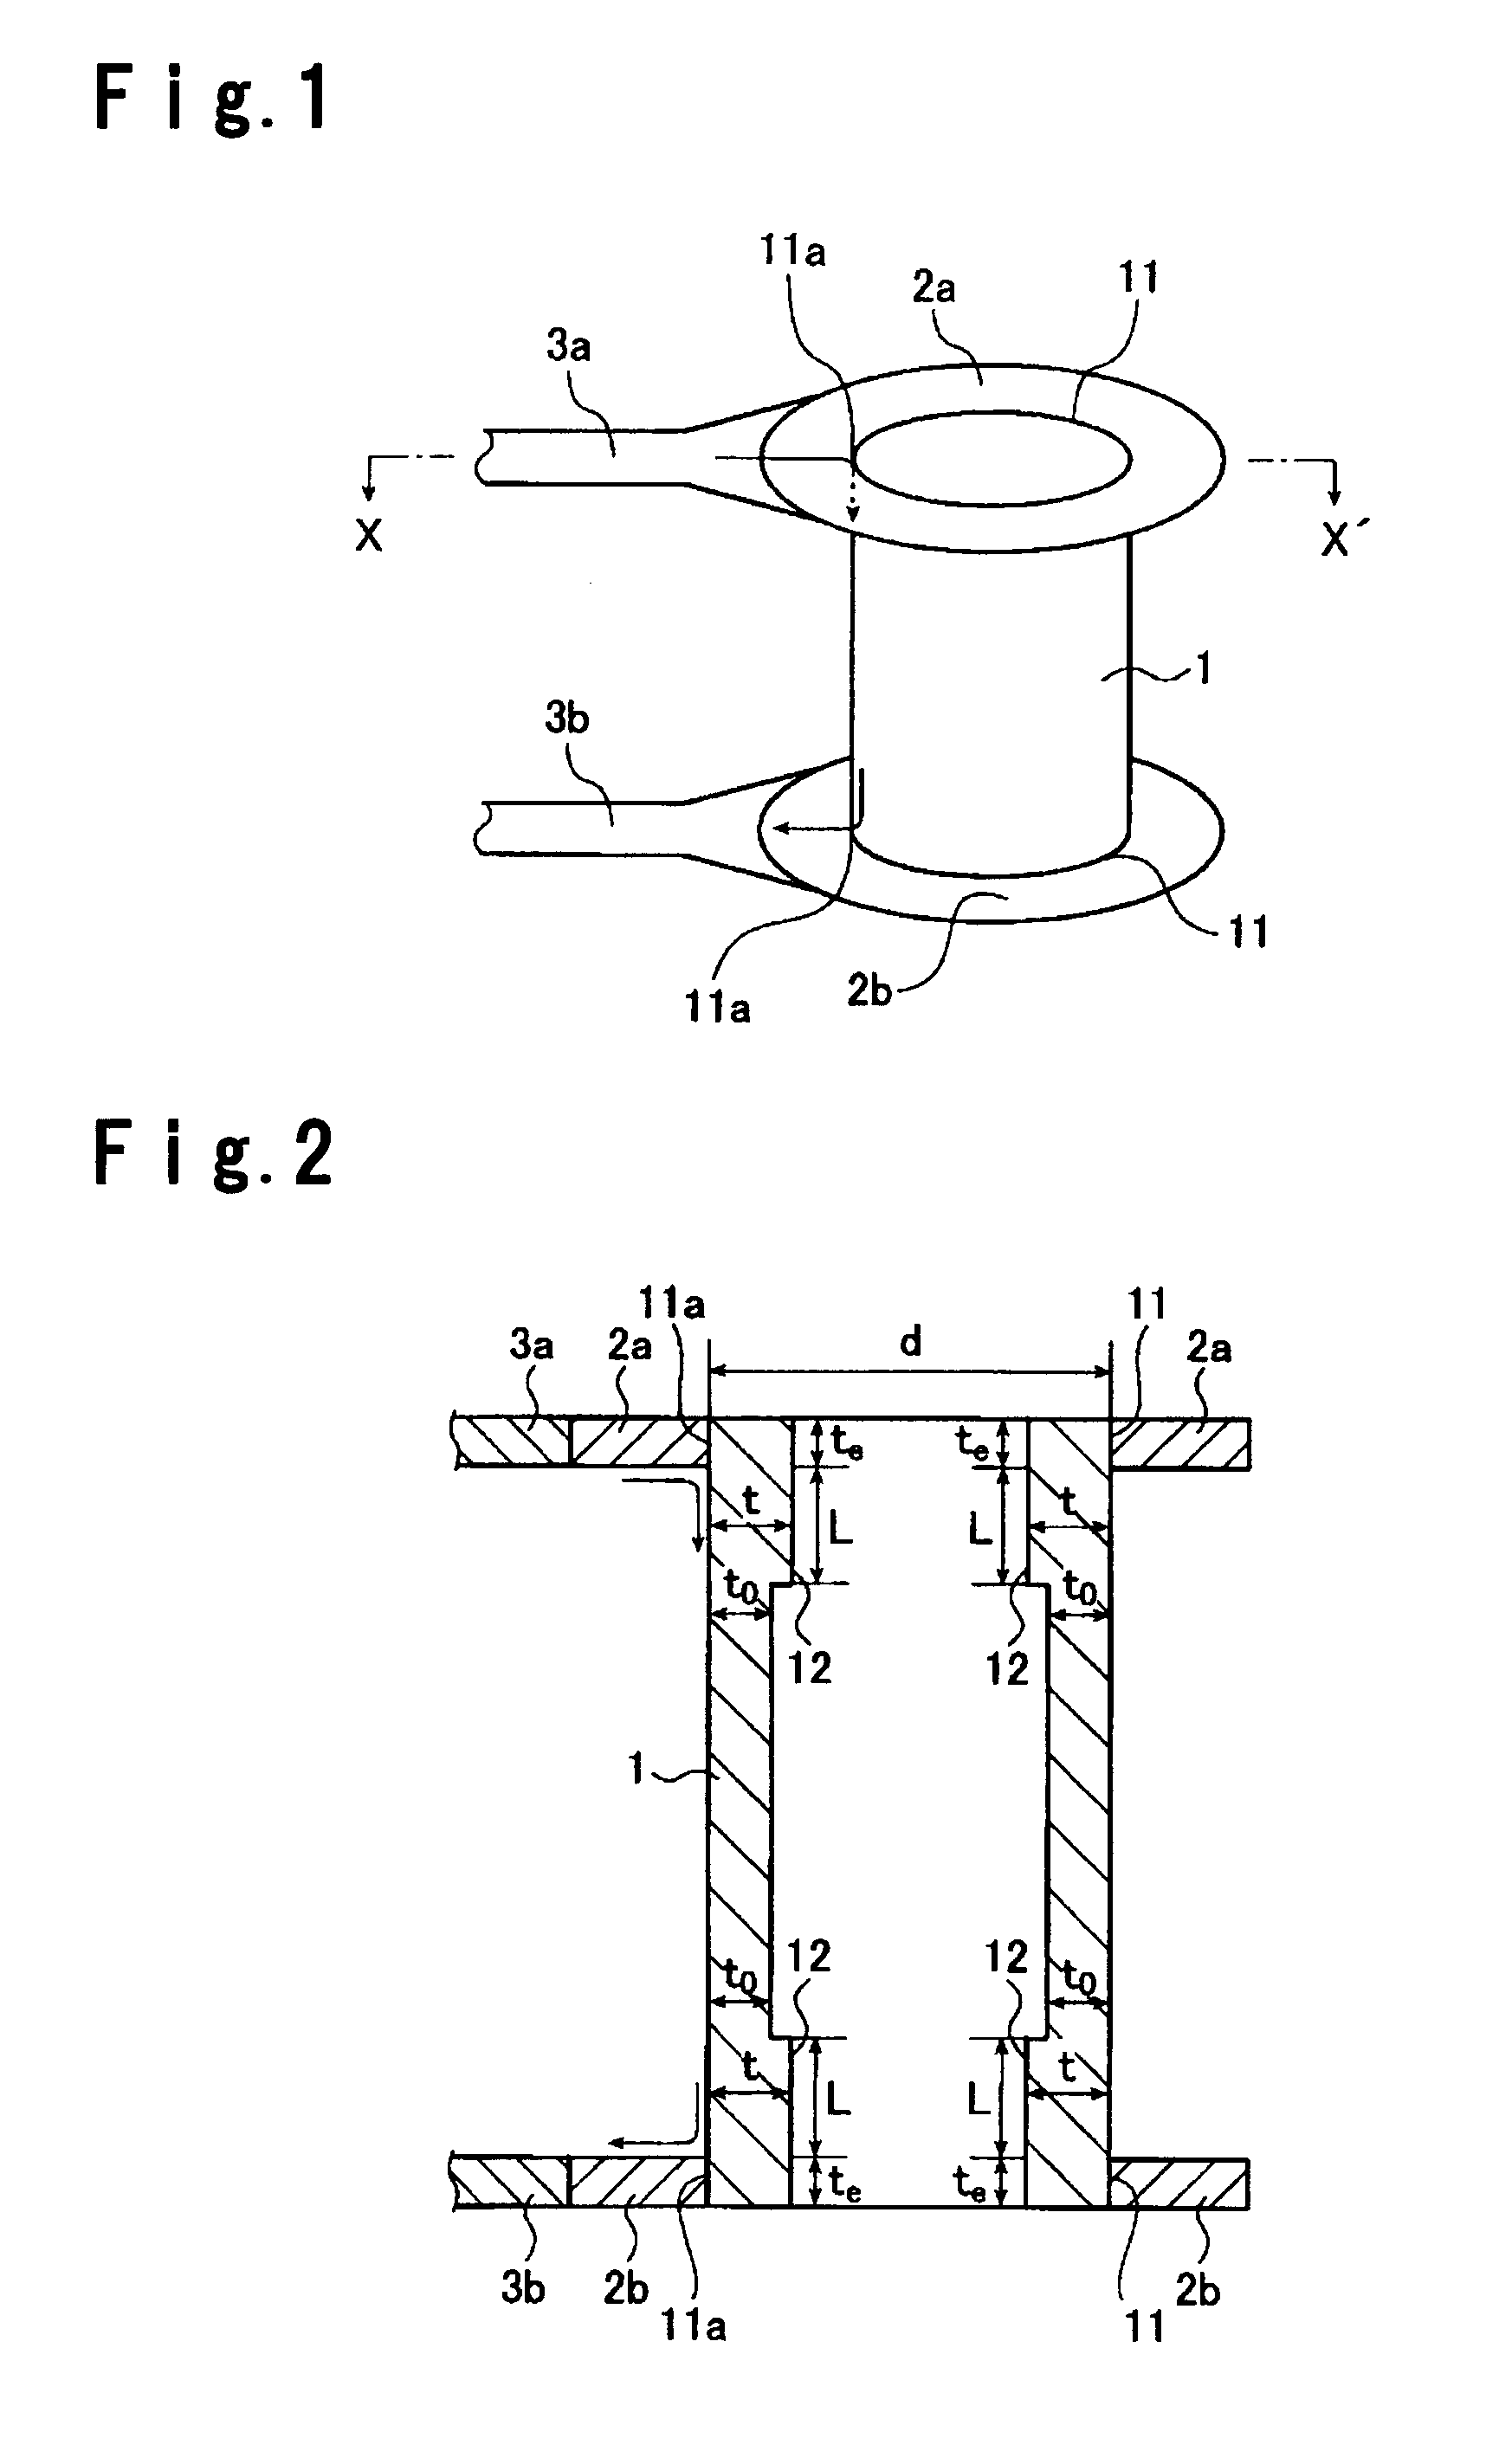 Glass manufacturing apparatus, a structural member thereof and method for heating the structural member by conduction heating